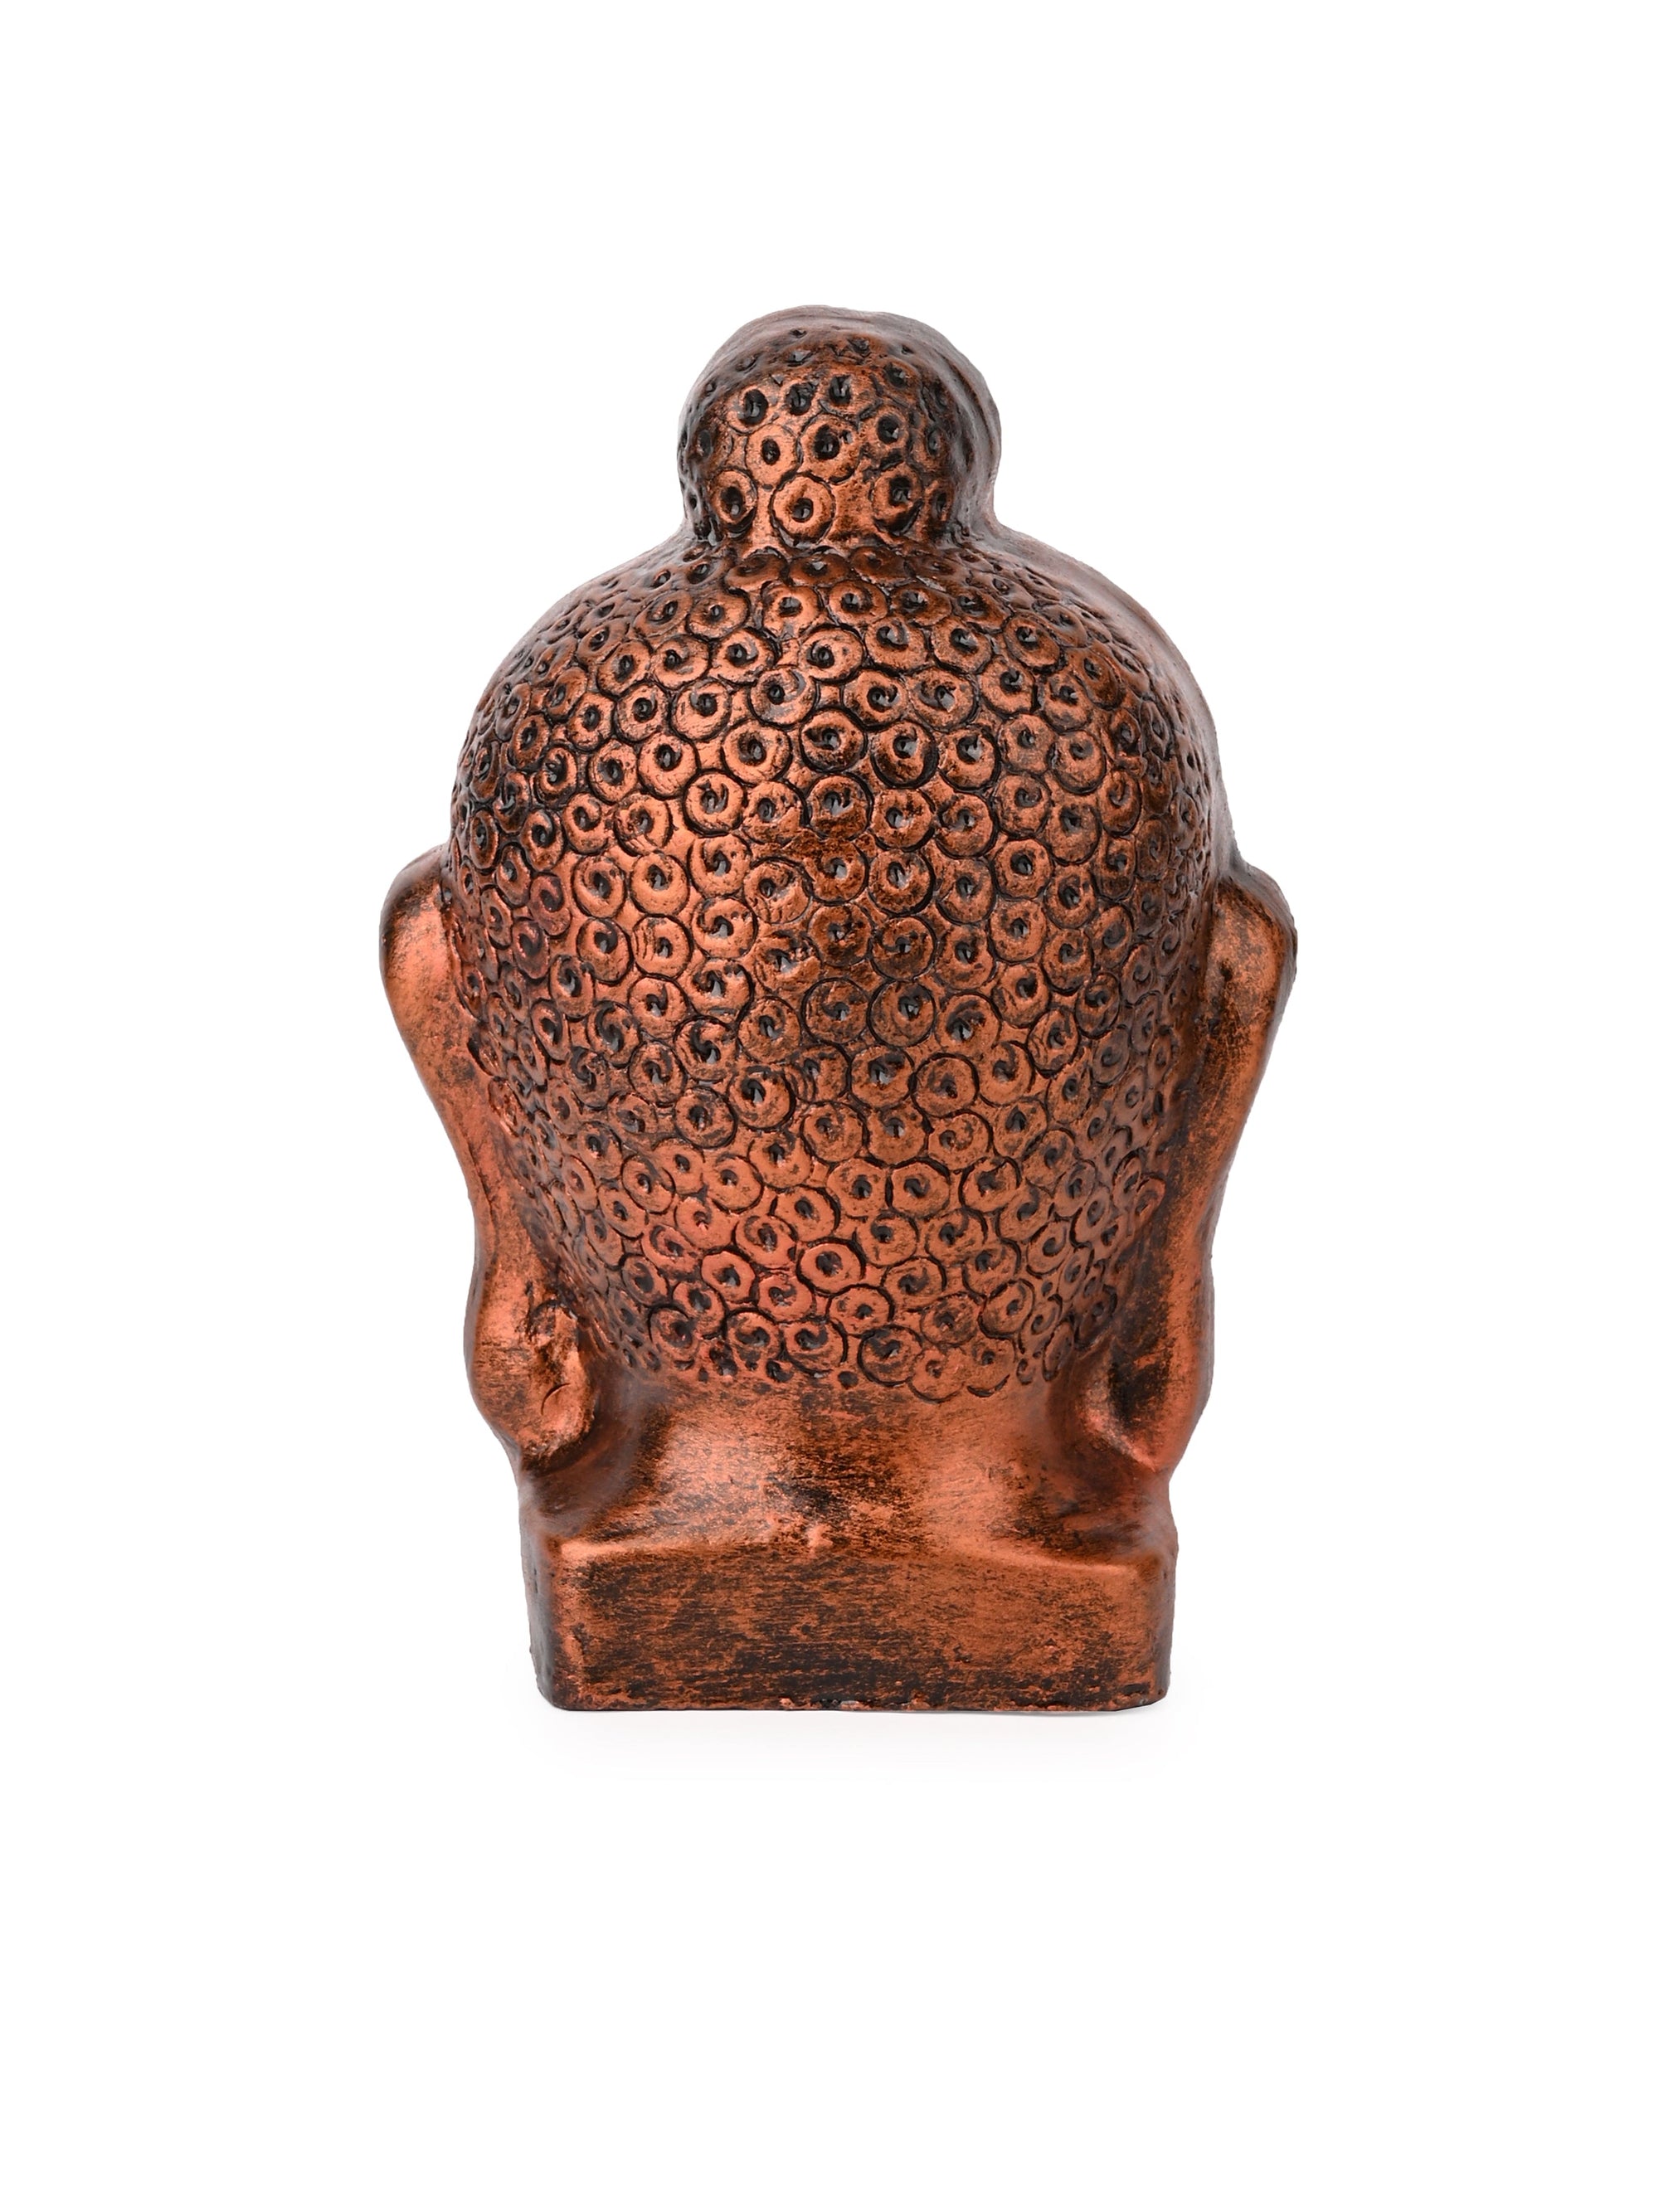 Terracotta Handcrafted Lord Buddha Face in Metallic Brown Color